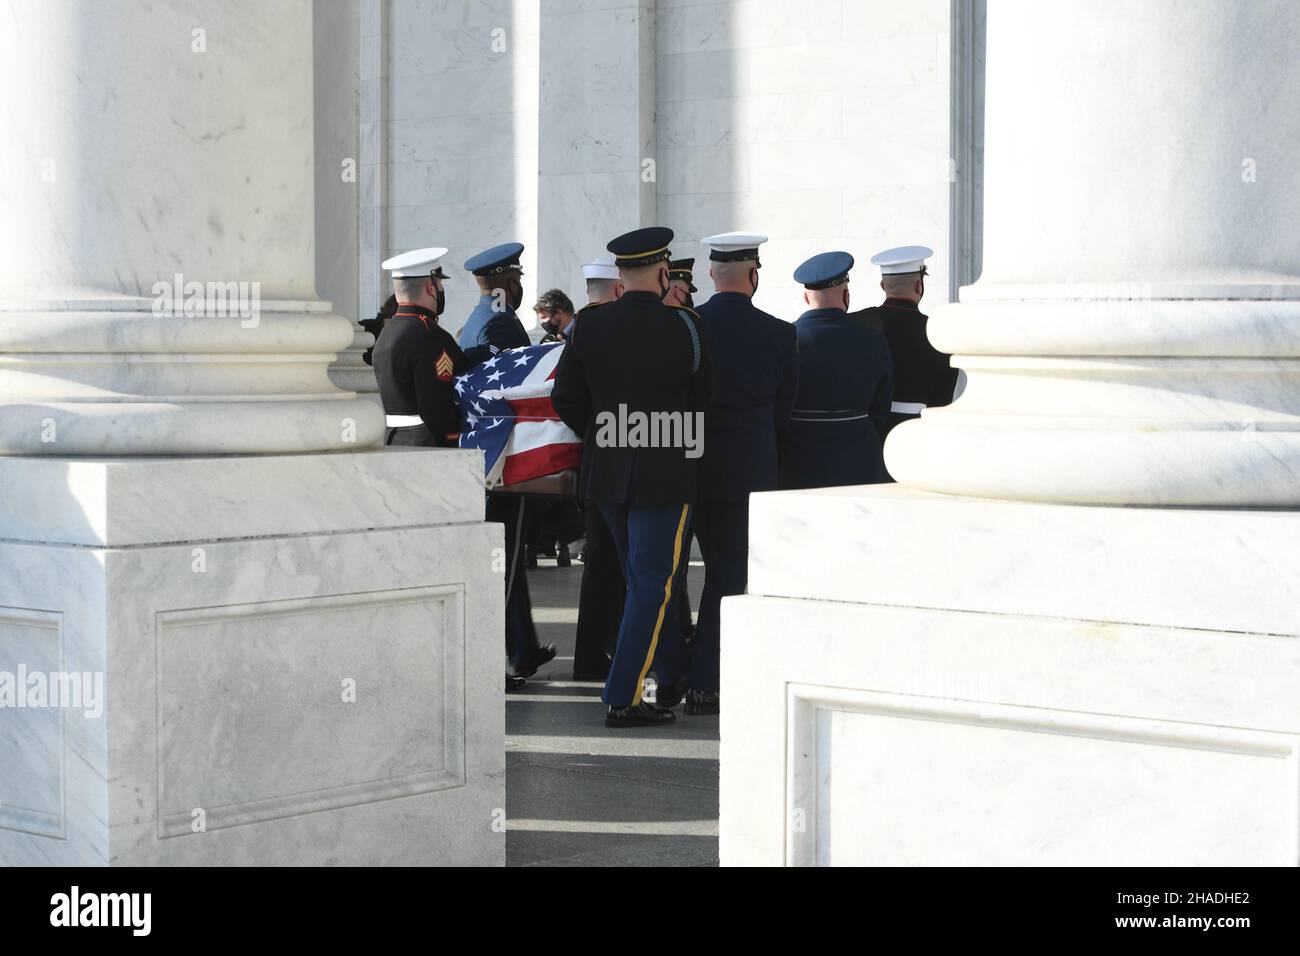 Washington, United States of America. 09 December, 2021. U.S. Armed Forces honor guard carry the flag-draped casket of World War II veteran and former Senator Robert Dole into the U.S. Capitol where it will lay in state, December 9, 2021 in Washington, D.C. Senator Dole died at age 98 following a lifetime of service to the nation.  Credit: Cpl. XaViera Masline/U.S. Army/Alamy Live News Stock Photo